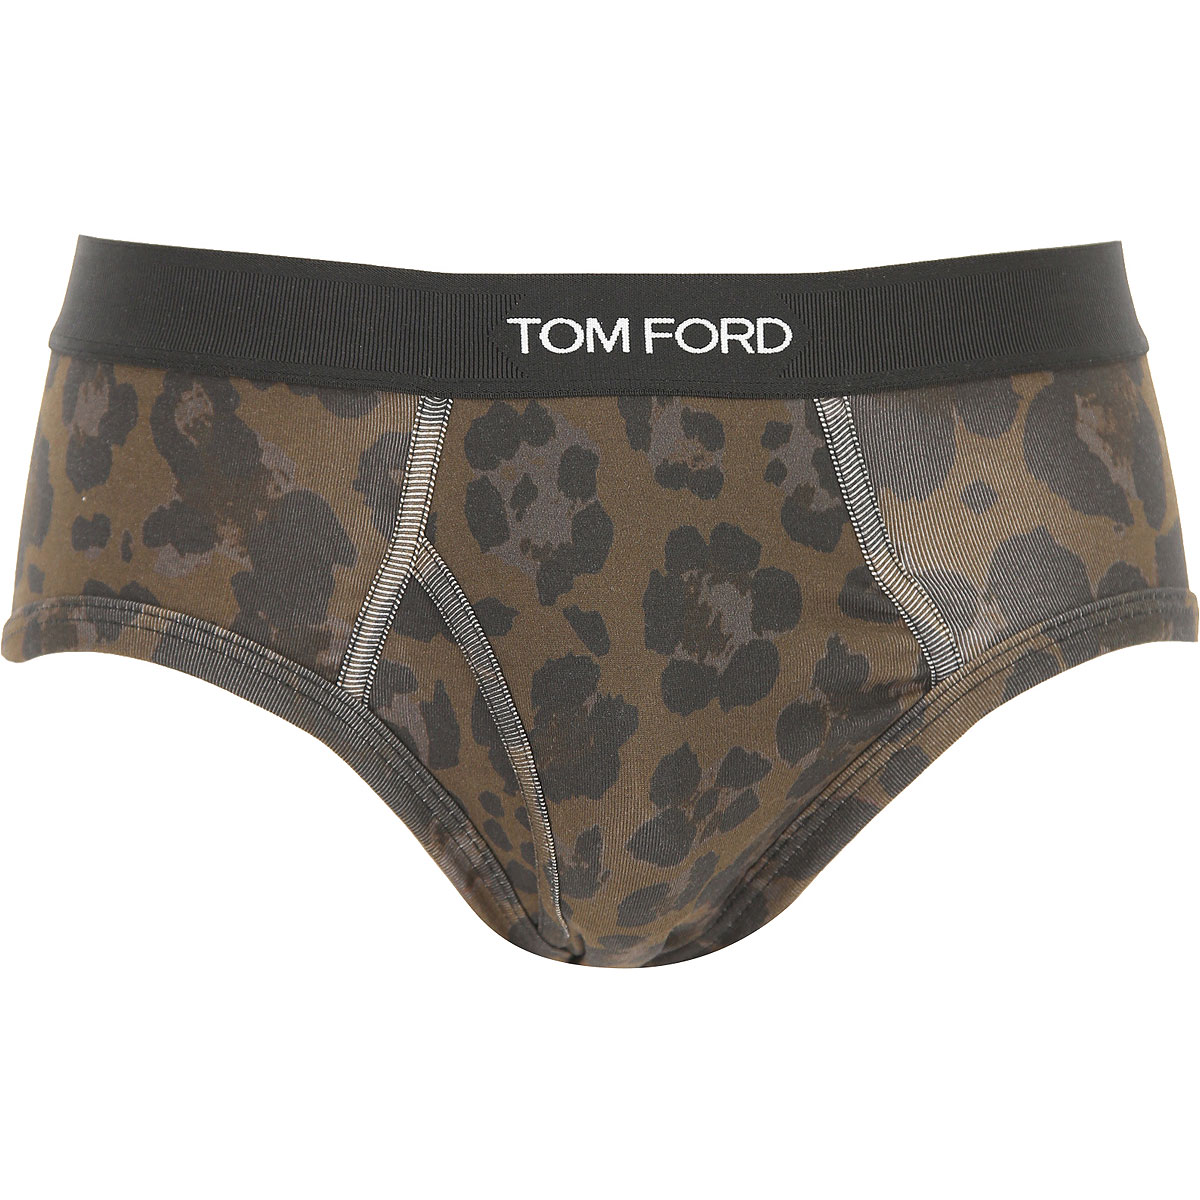 Mens Underwear Tom Ford, Style code: t4lc1-1110-208